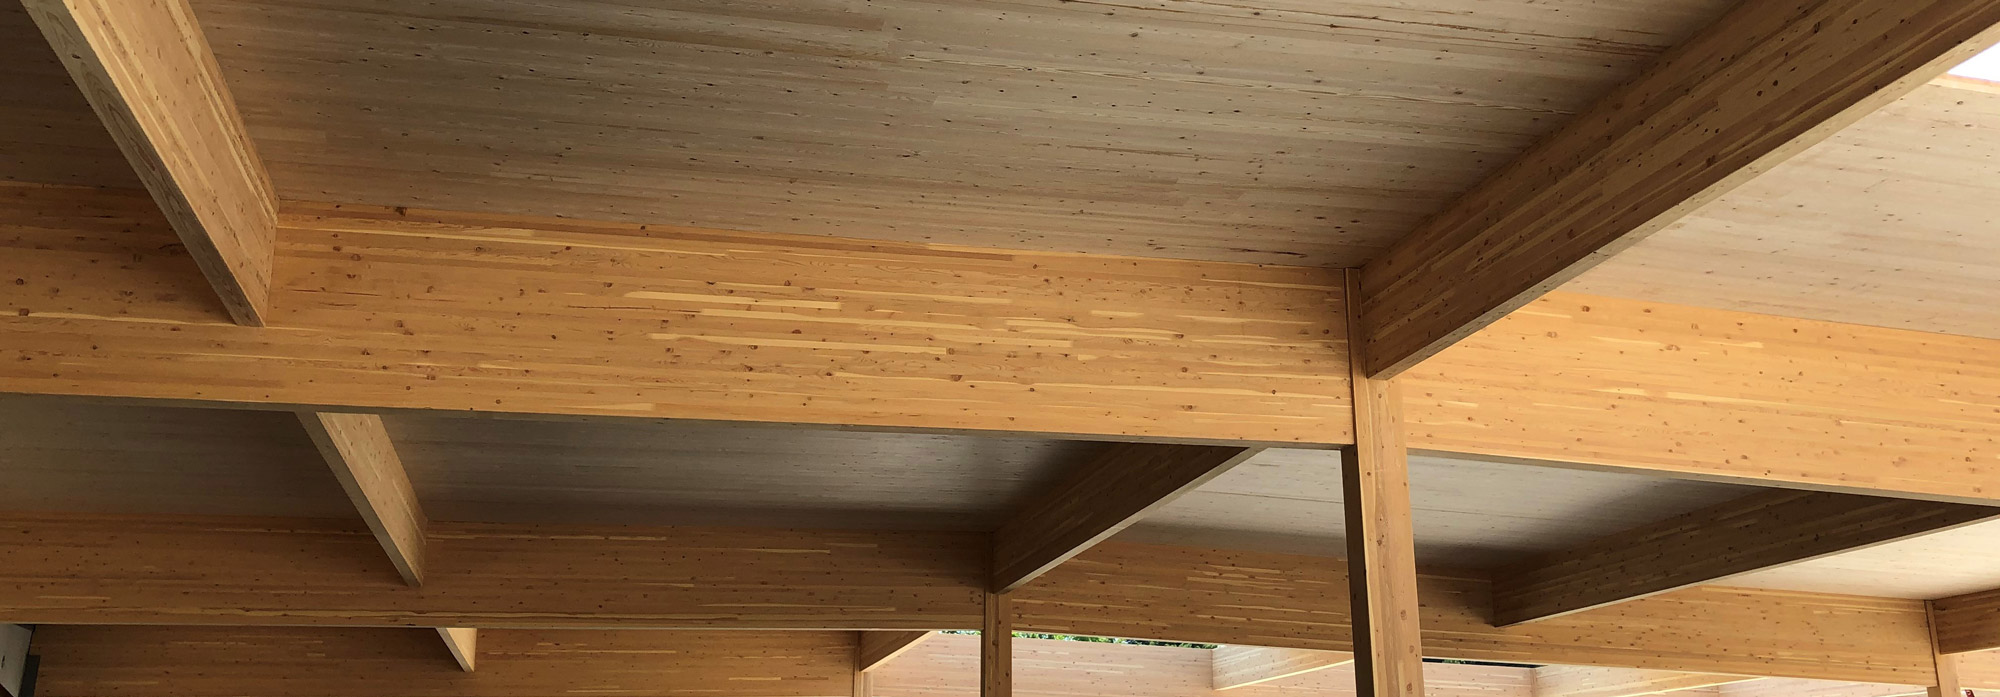 Pacific HemFir Timbers and ceiling